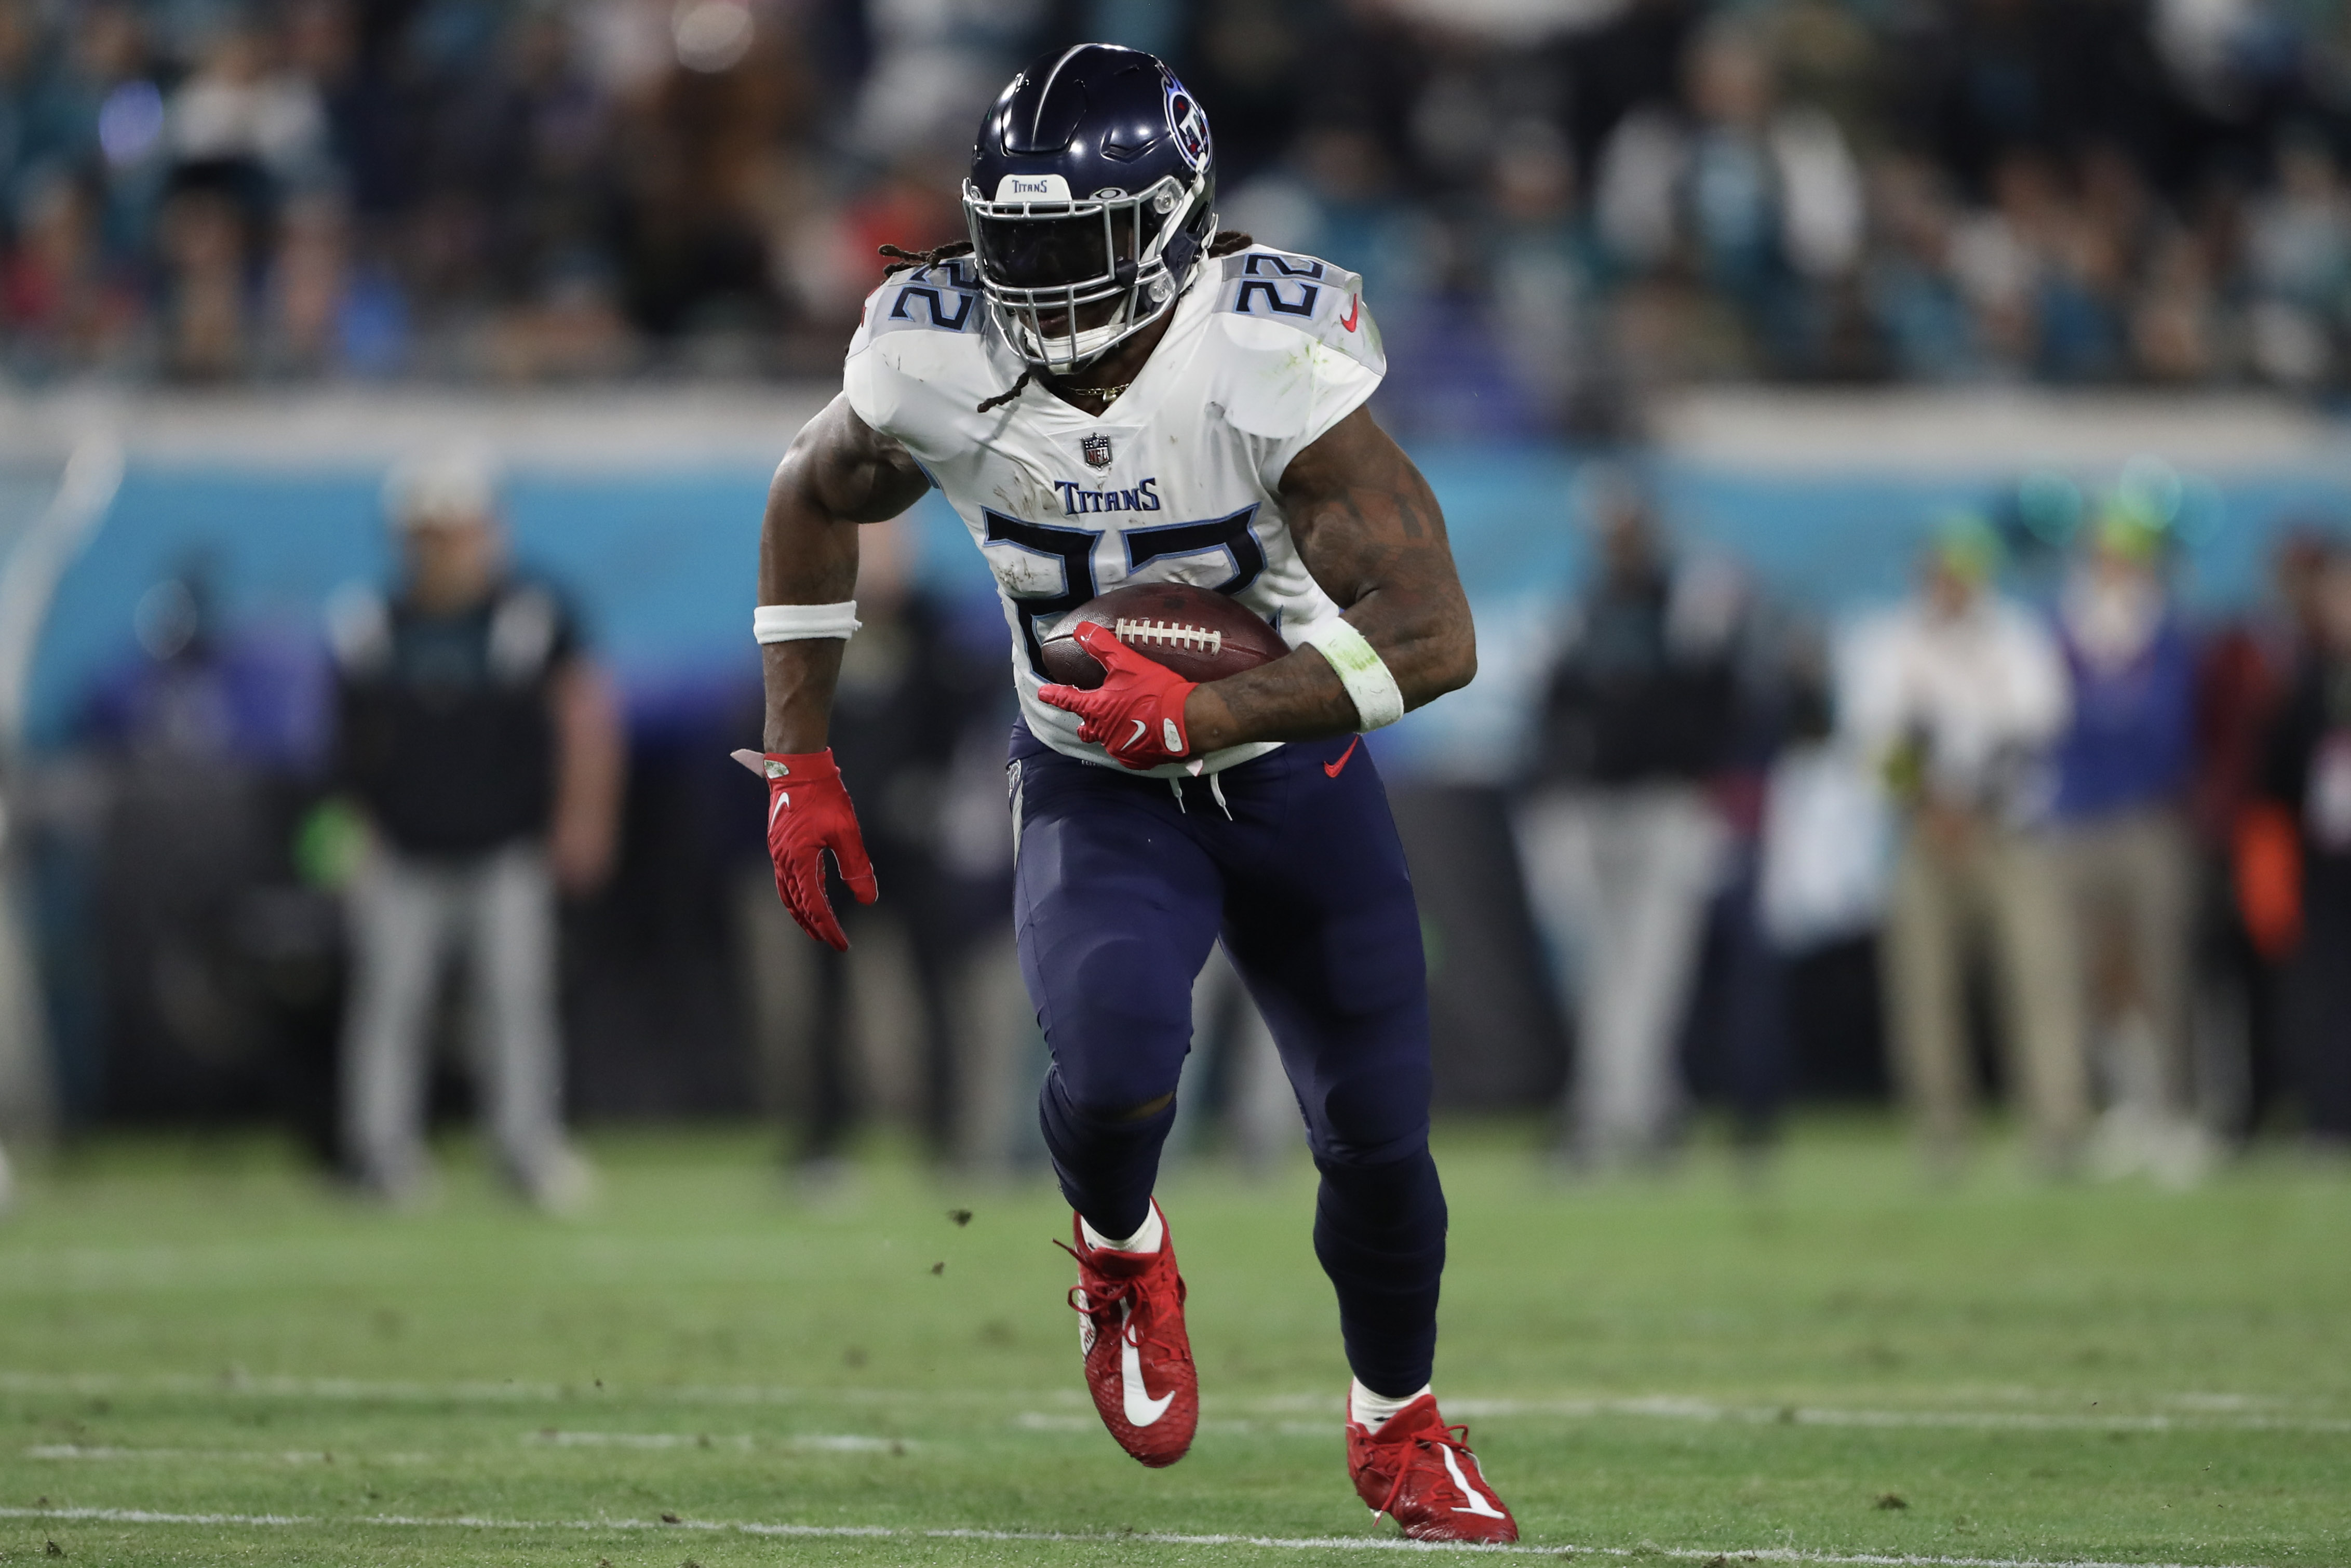 Running back Derrick Henry of the Tennessee Titans carries the ball in the game against the Jacksonville Jaguars at TIAA Bank Field in Jacksonville, Florida, January 7, 2023. /CFP 